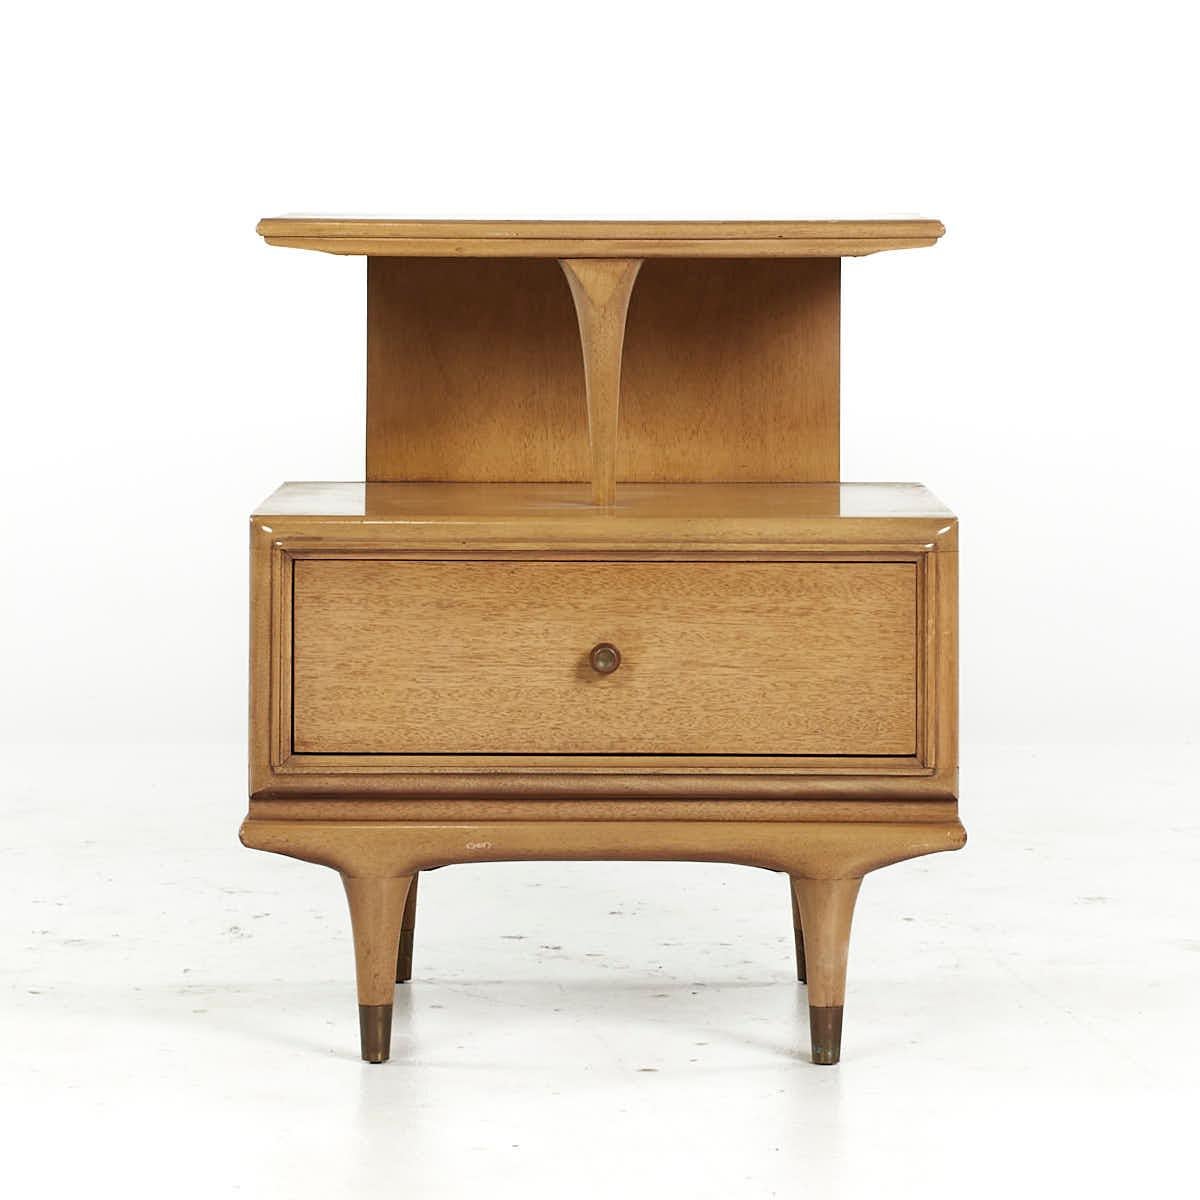 Kent Coffey Continental Mid Century Nightstand

This nightstand measures: 22 wide x 18 deep x 28.5 inches high

All pieces of furniture can be had in what we call restored vintage condition. That means the piece is restored upon purchase so it’s